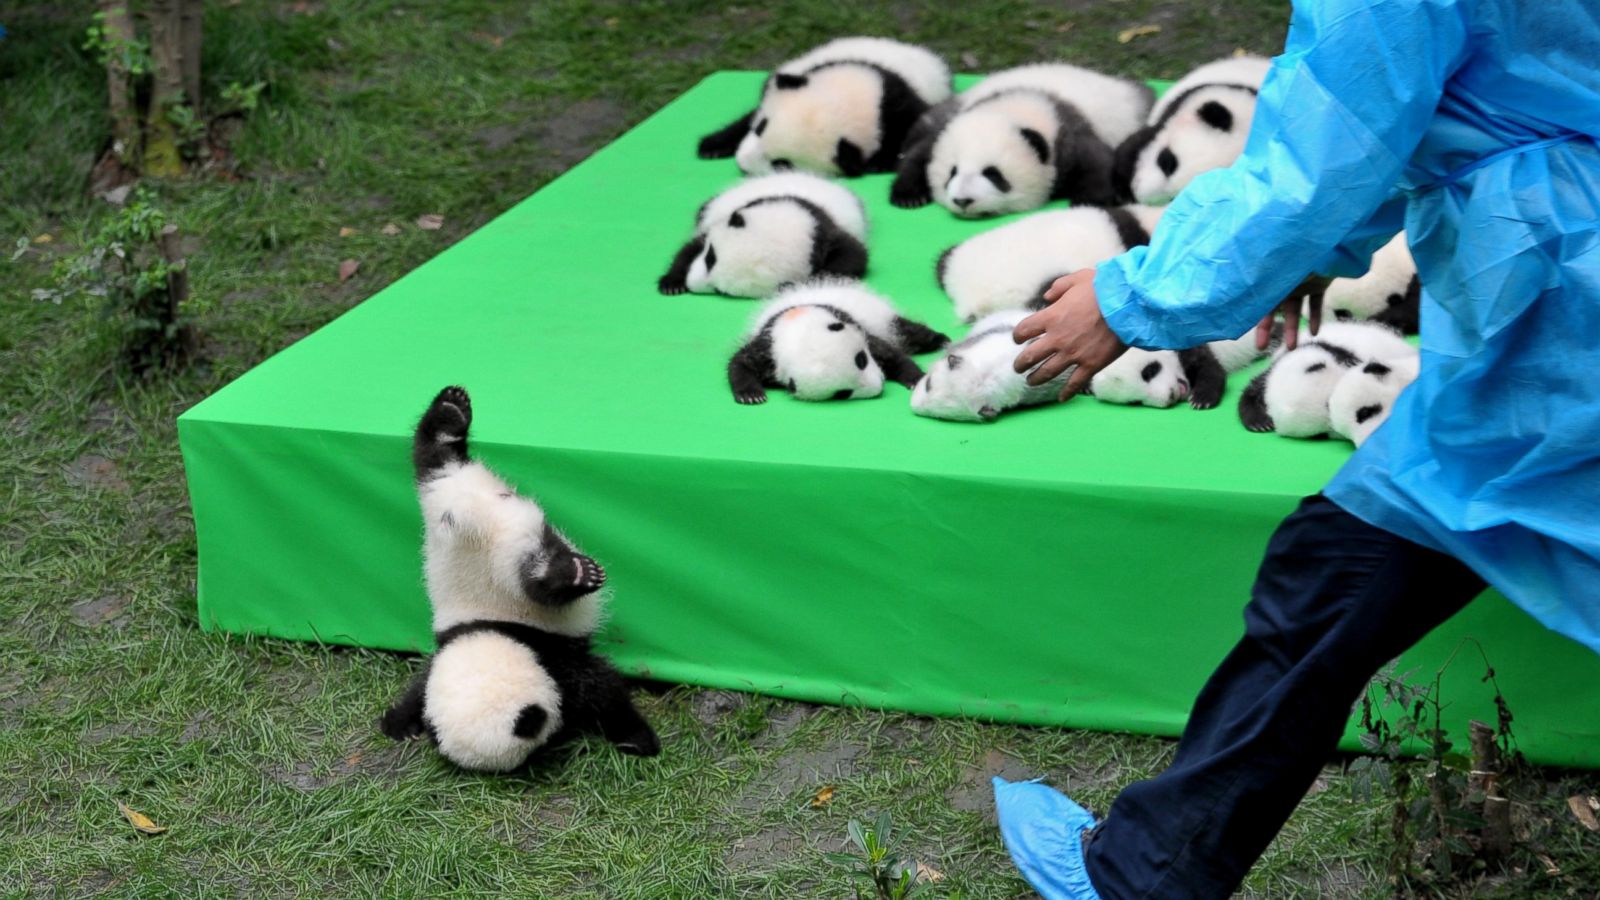 Silly Baby Panda Falls Flat on Its Face During Public Debut of 23 Giant  Panda Cubs in China - ABC News